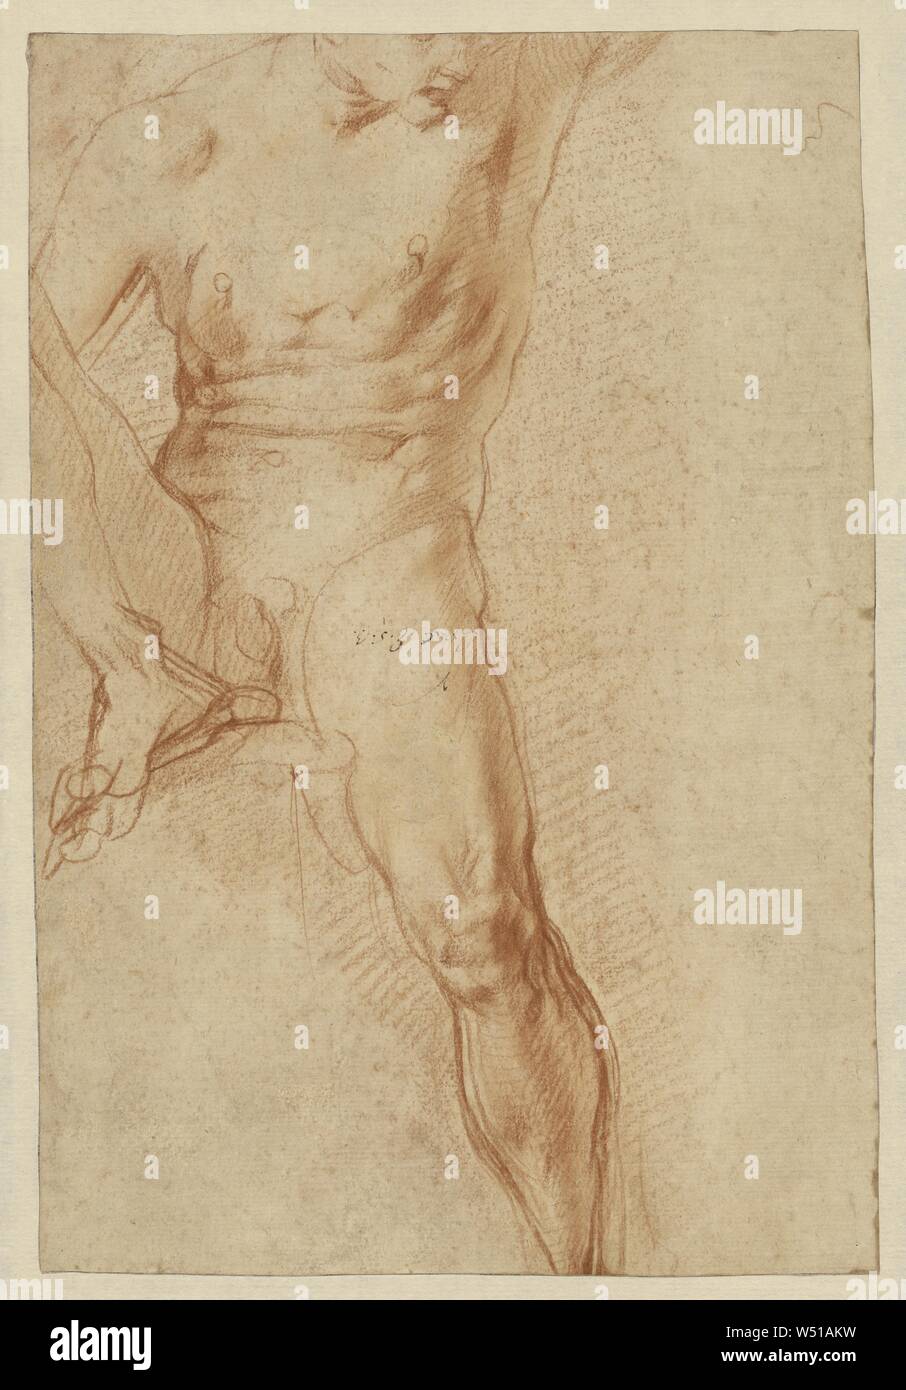 Seated Figure (recto), Reclining Figure (verso), Pontormo (Jacopo Carucci) (Italian (Florentine), 1494 - 1557), Italy, 1520, Red chalk with some stumping, 29.4 x 20 cm (11 9/16 x 7 7/8 in Stock Photo